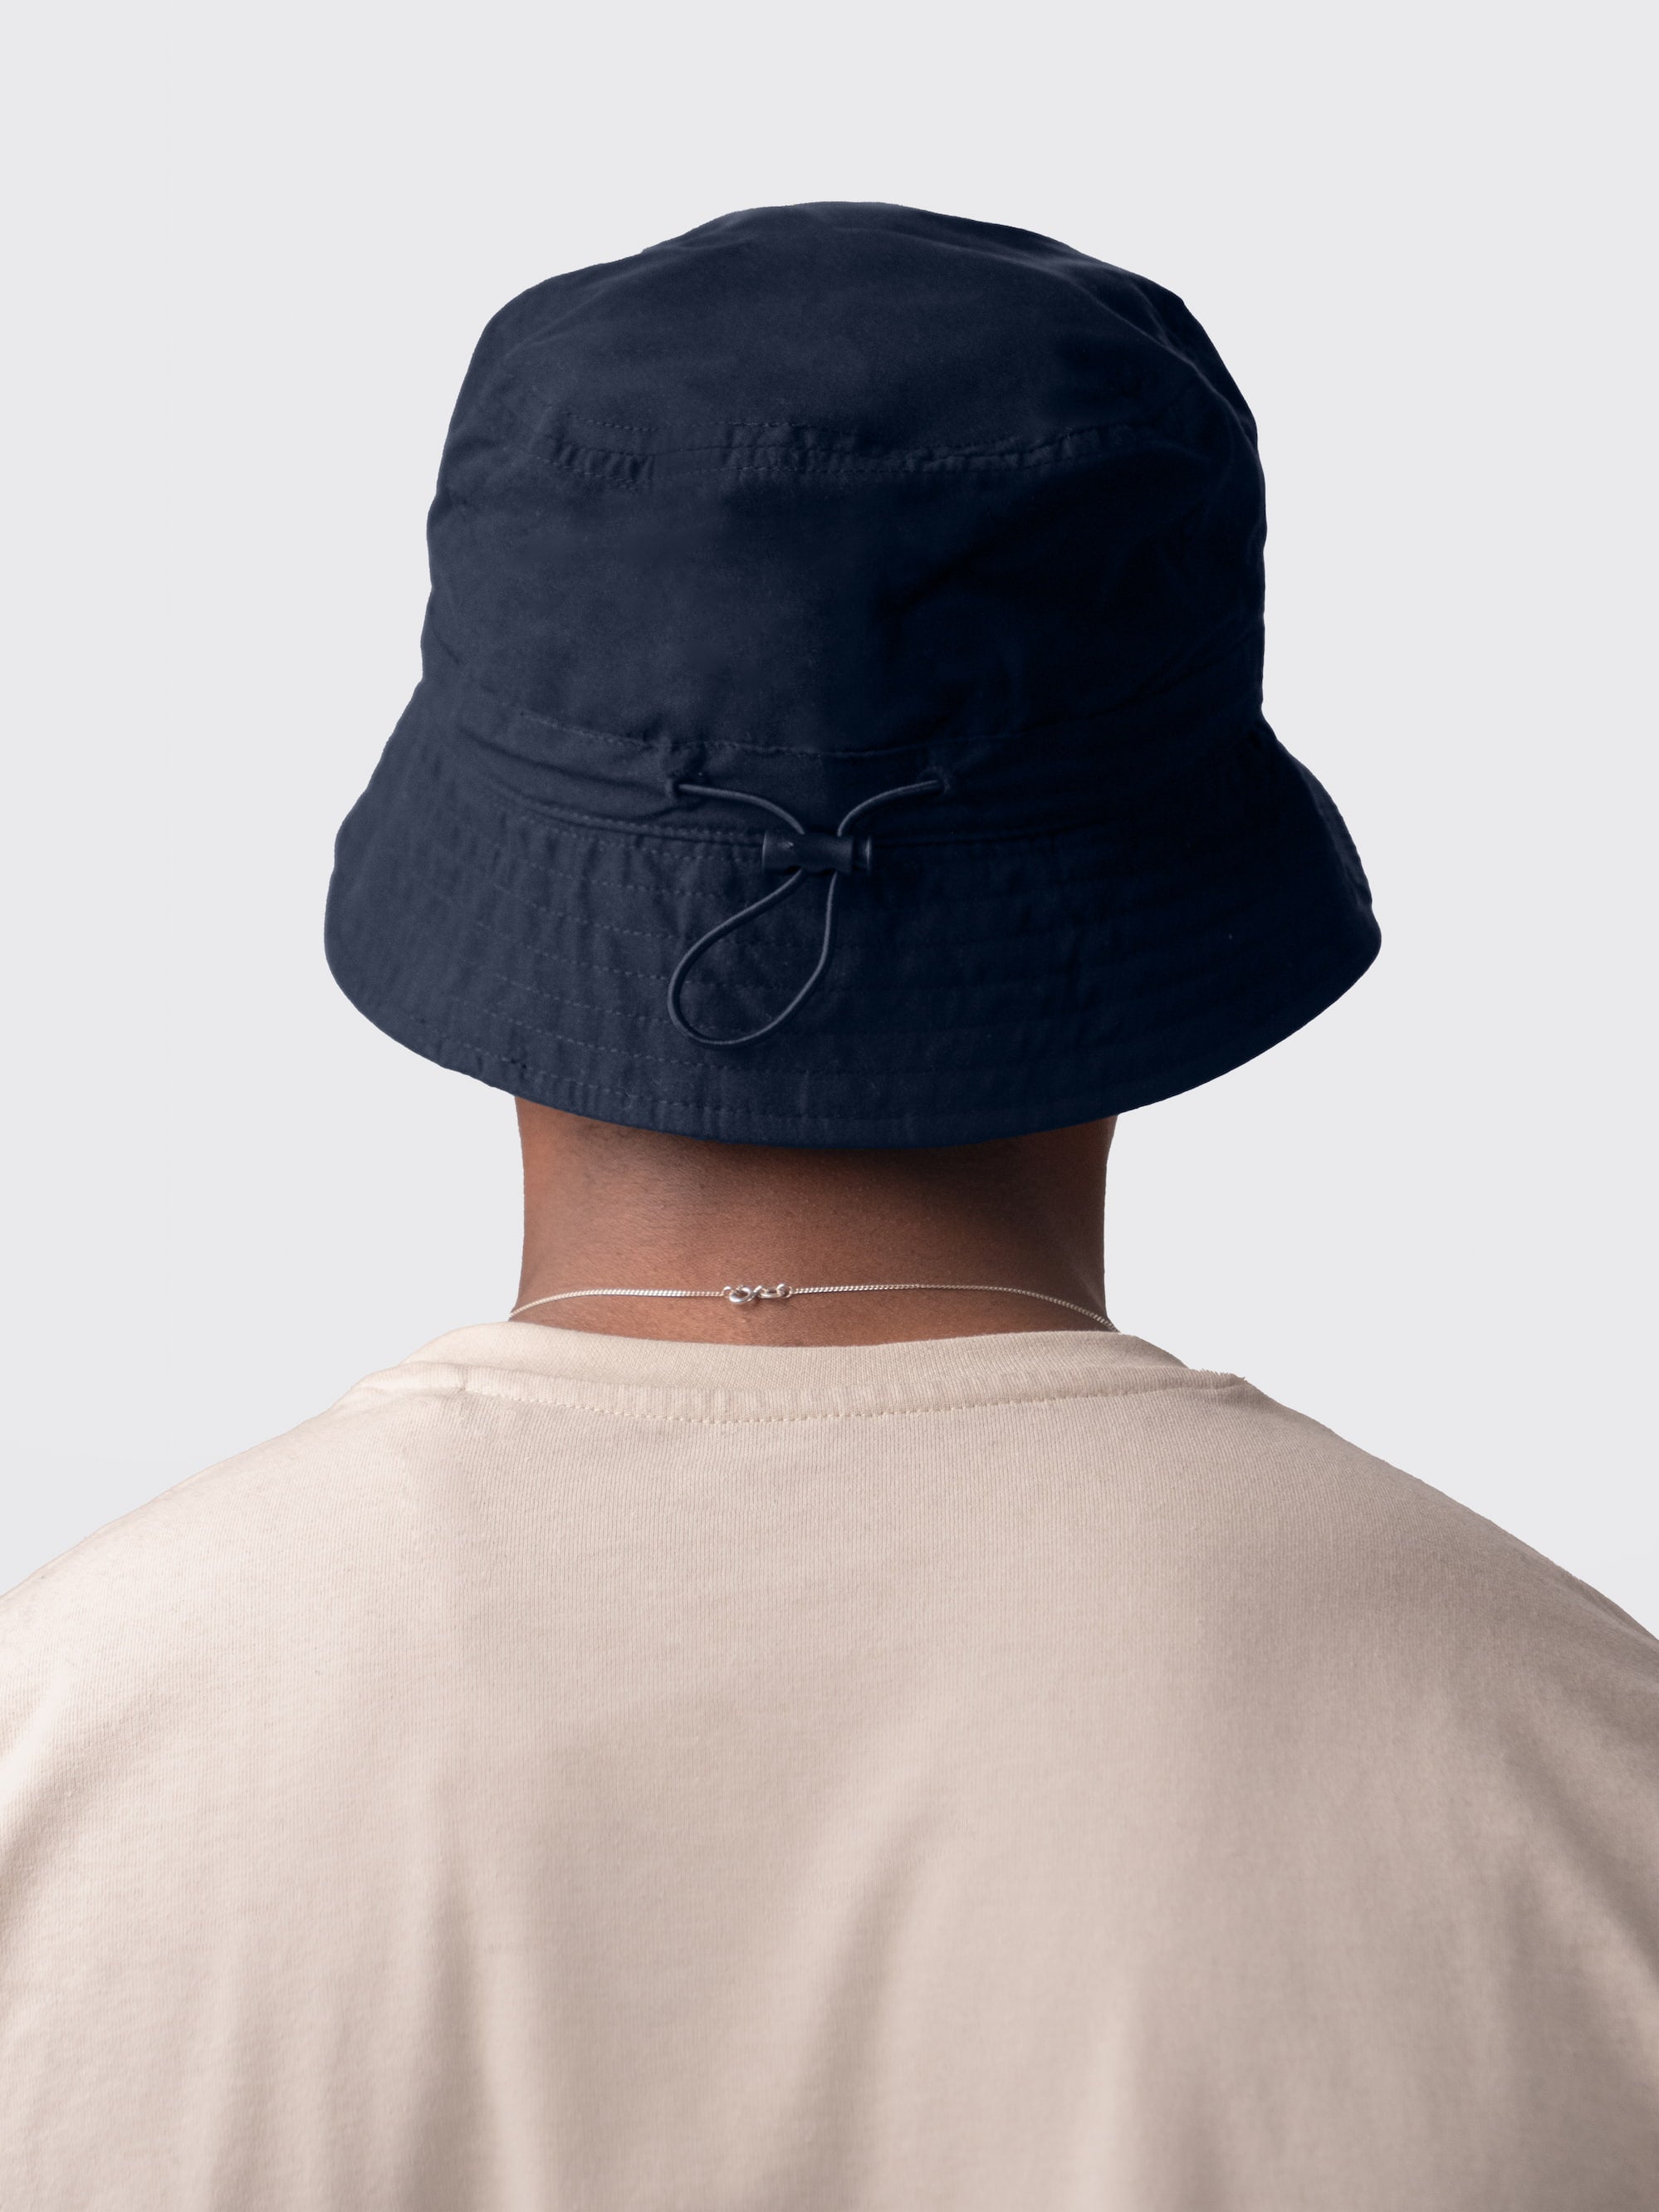  Sustainable bucket hat, made from eco-friendly recycled polyester 